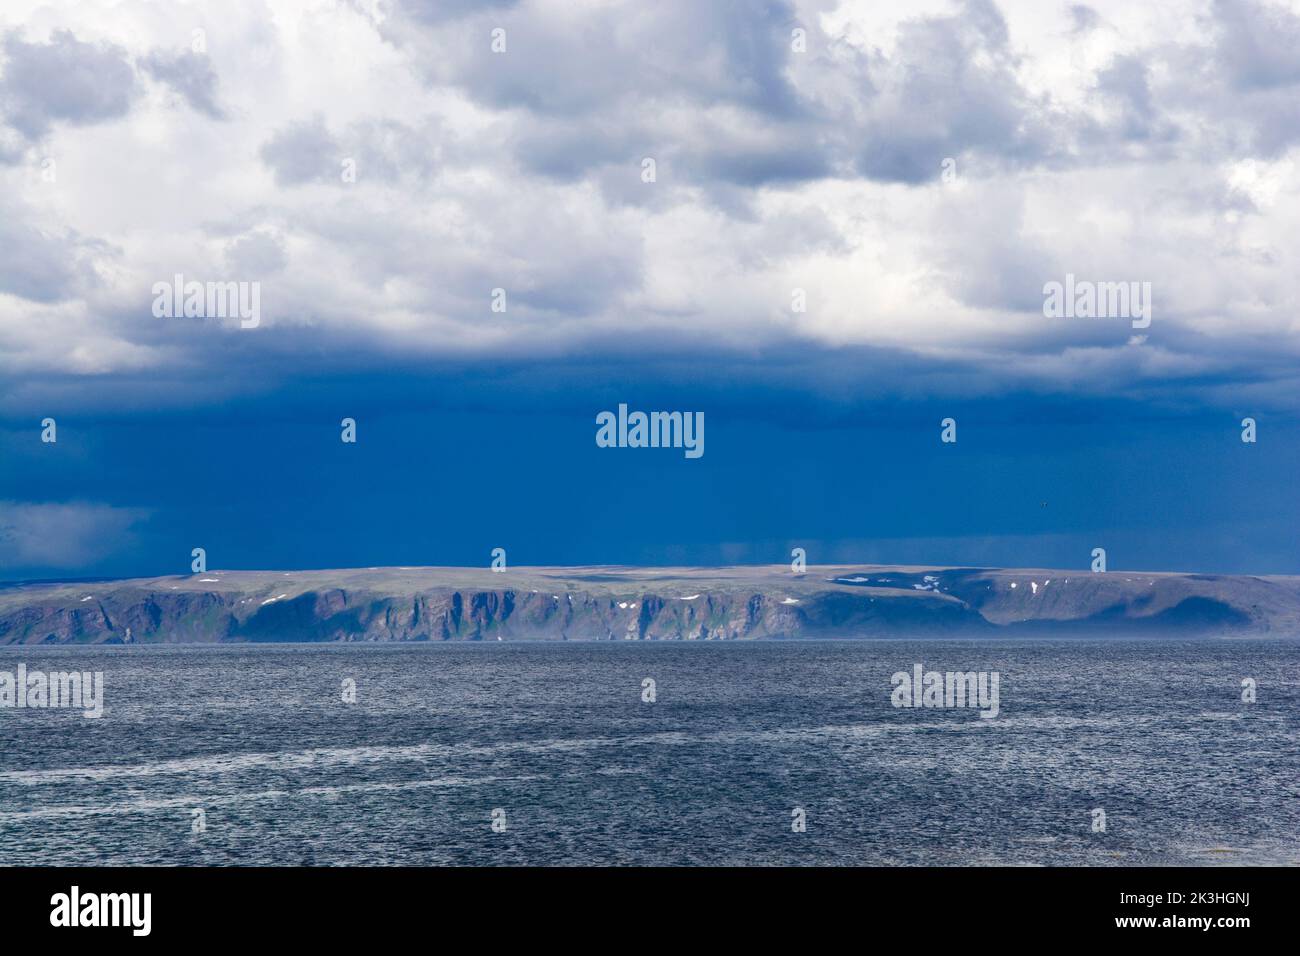 Stormy clouds over fjord, Hamningberg, Varanger, Norway Stock Photo